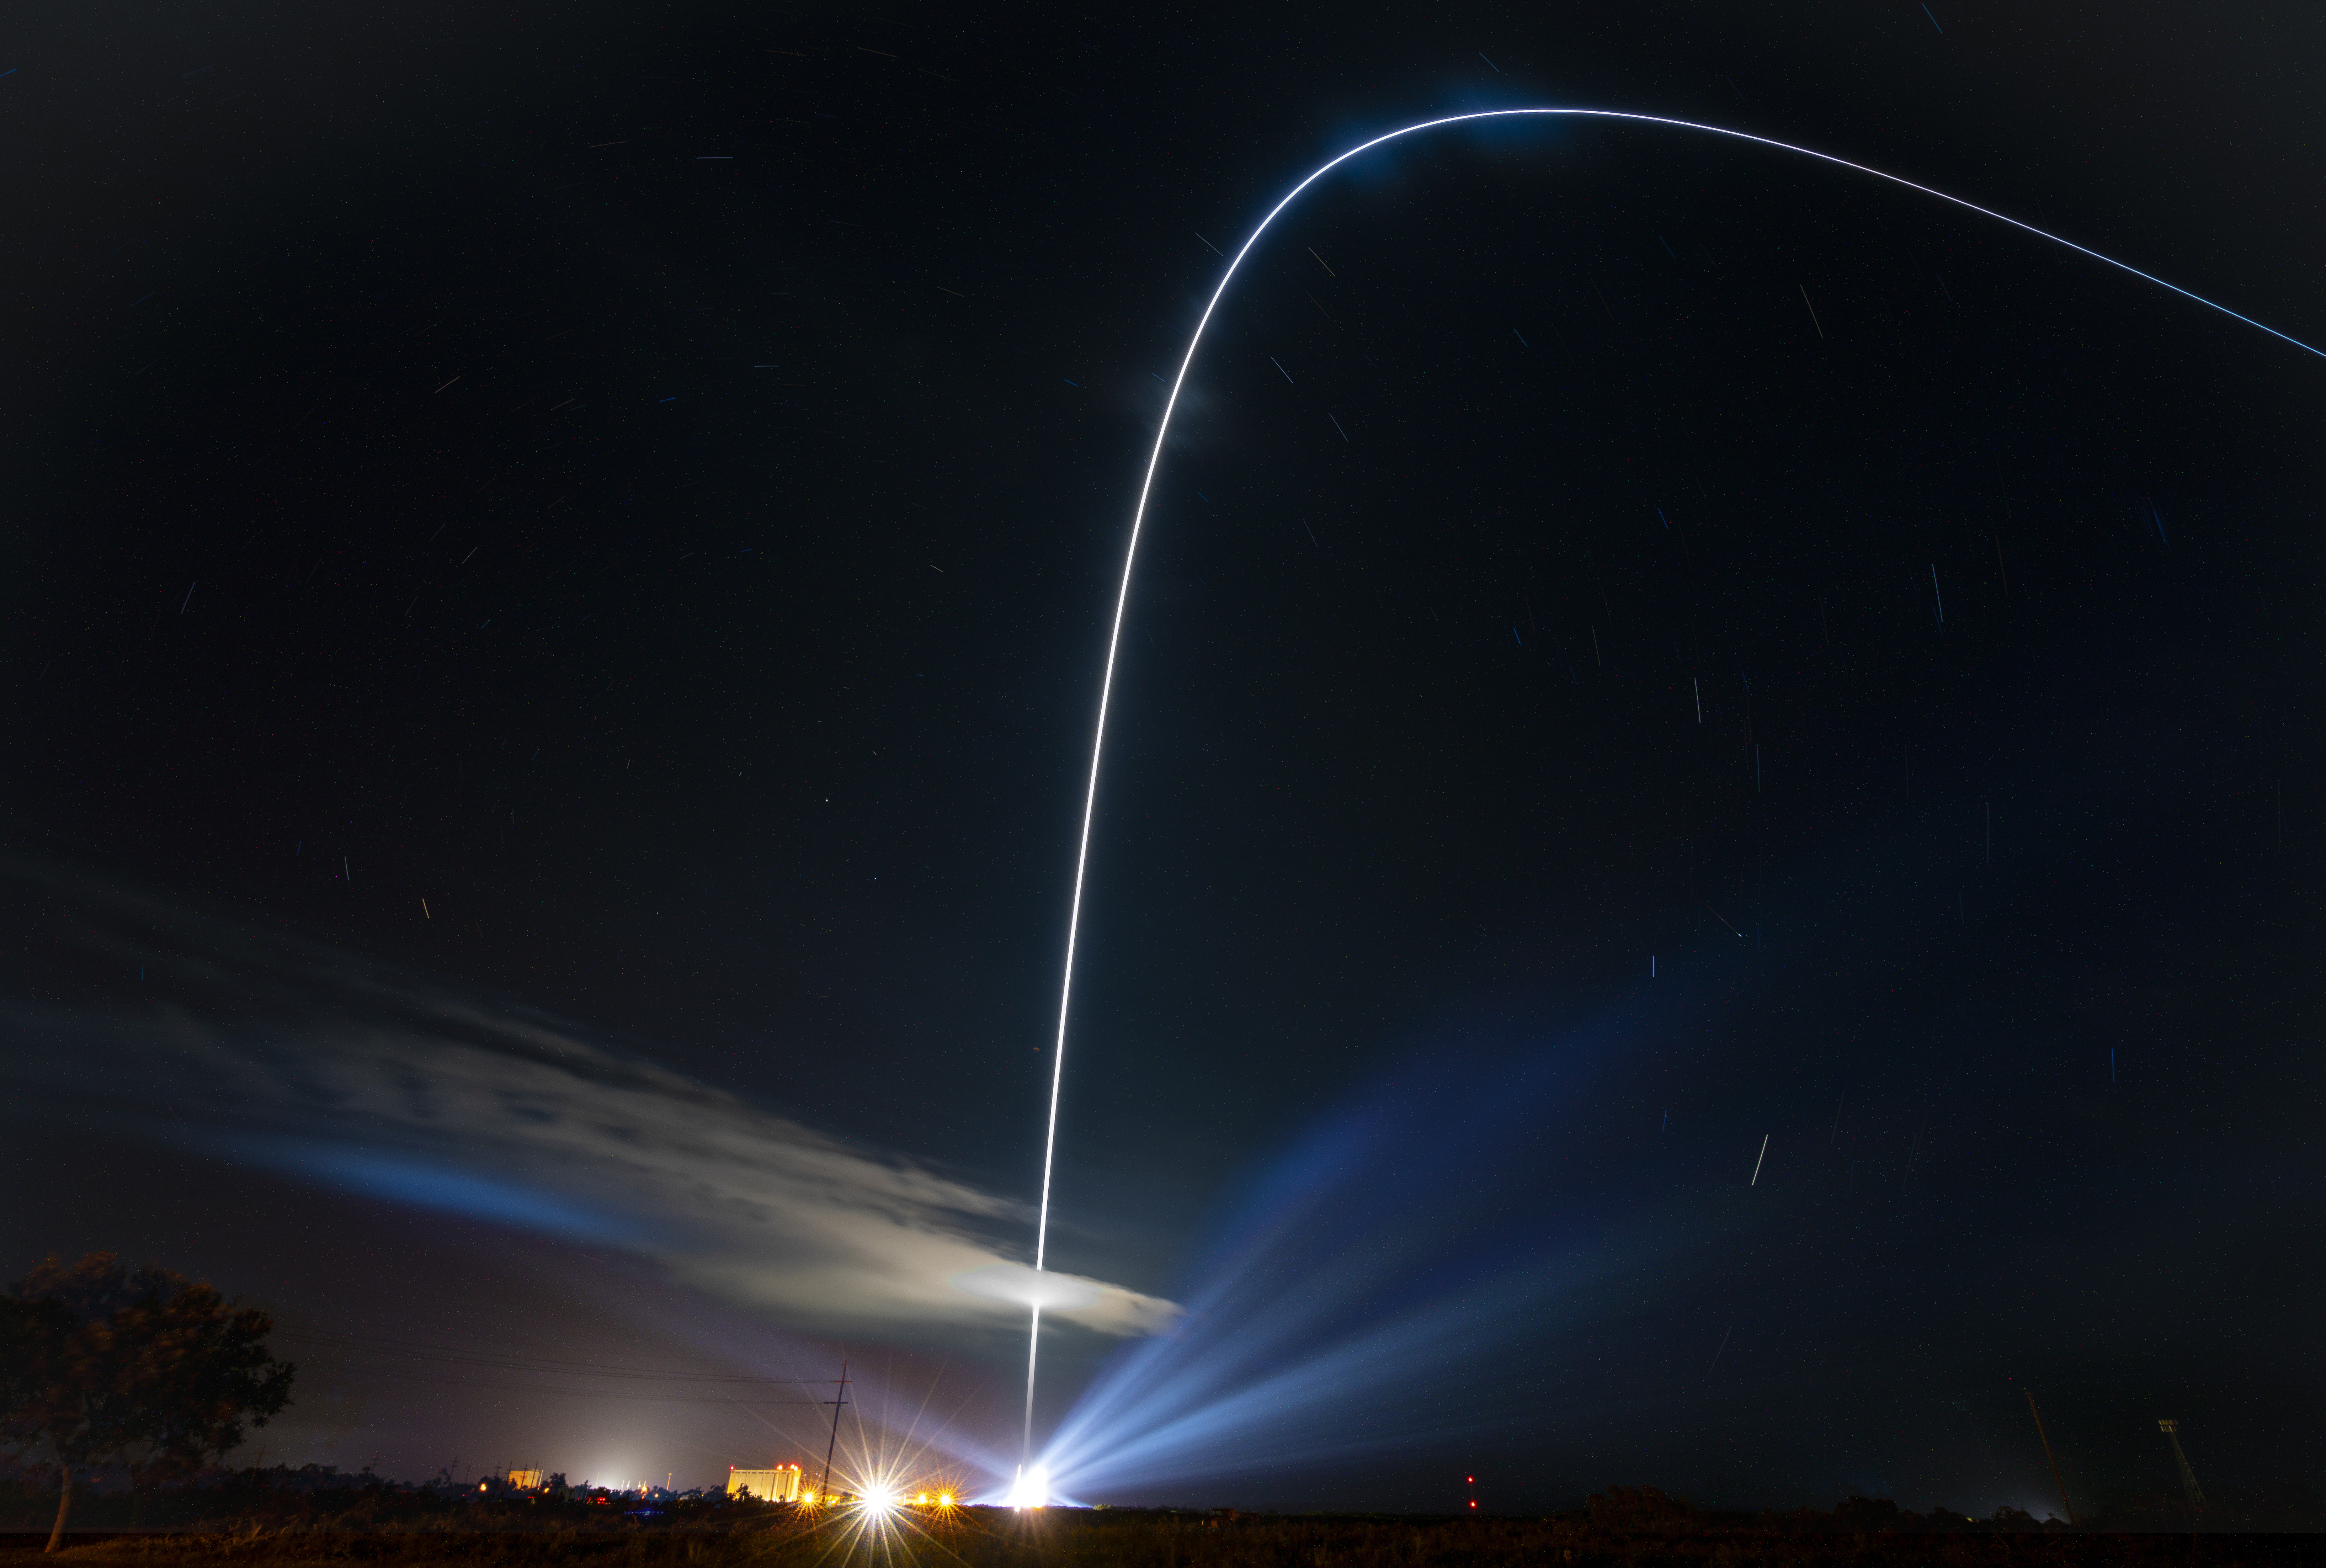 The Delta IV Heavy rocket carrying Parker Solar Probe is seen in this long exposure photograph taken during launch on Sunday, Aug. 12, 2018 from Launch Complex 37 at Cape Canaveral Air Force Station, Florida. 